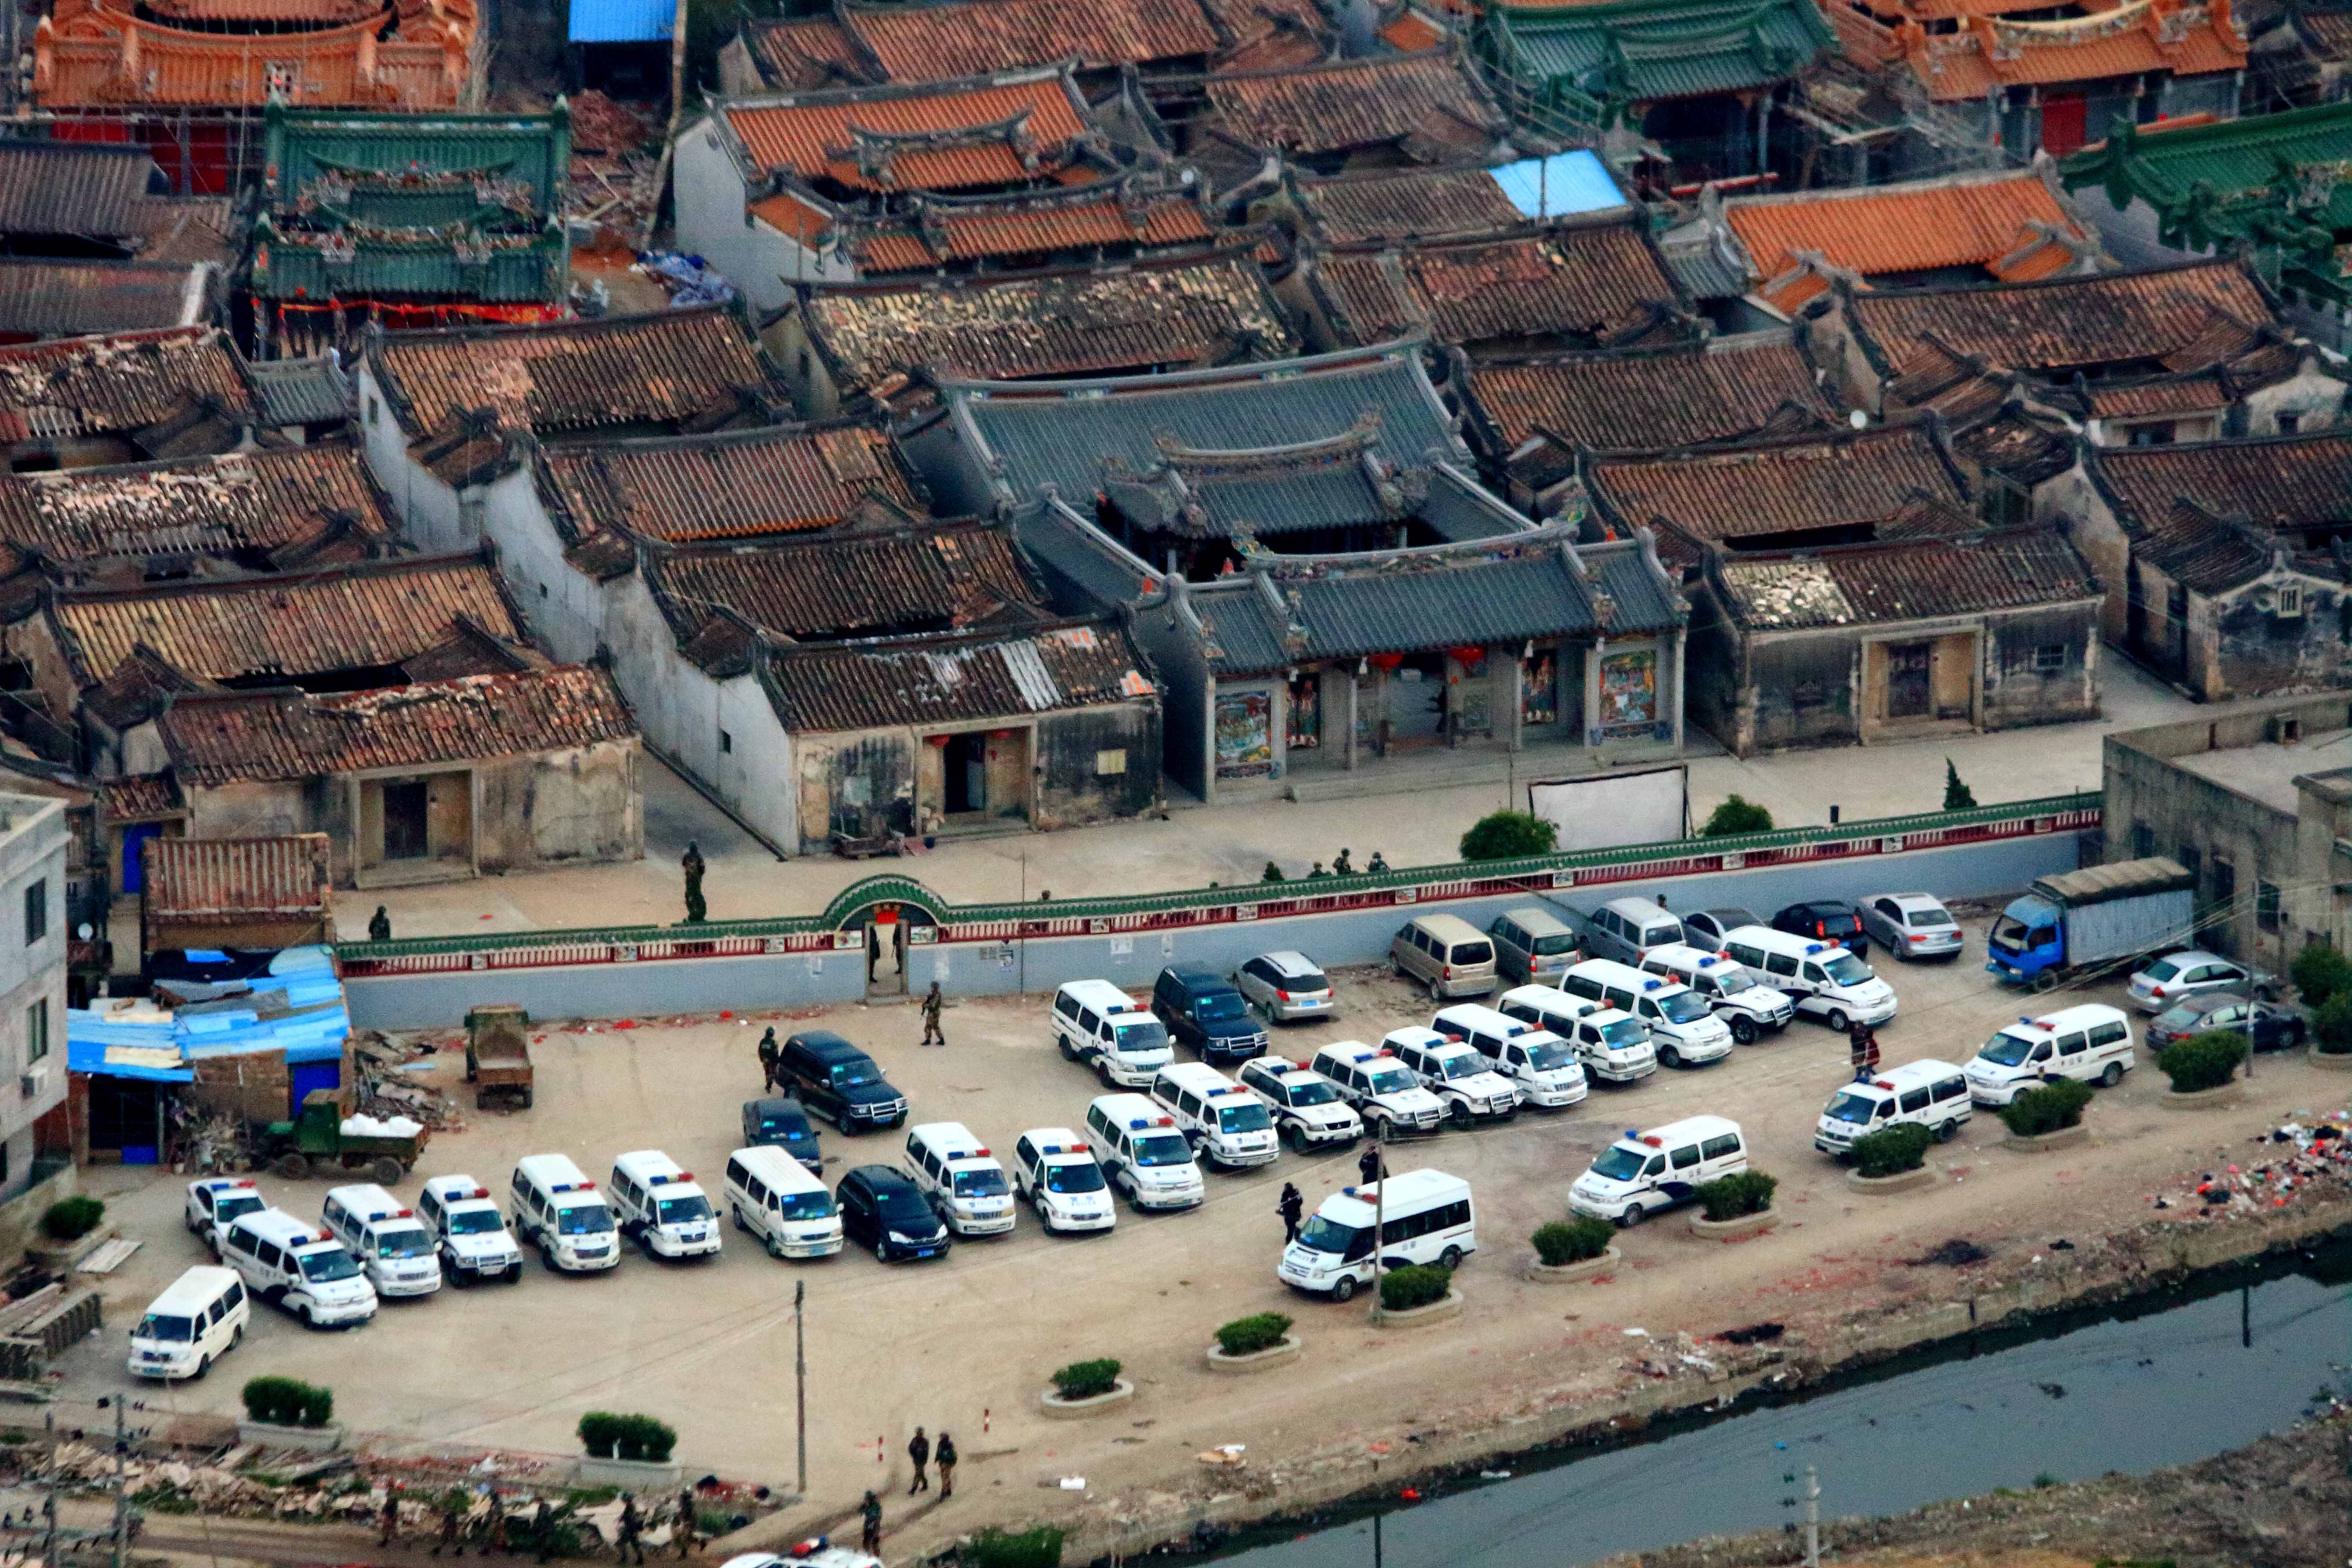 Police cars were lined up outside Boshe village, where a massive drug lab linked to numerous trafficking networks across the region was uncovered earlier this year. Photo: Xinhua